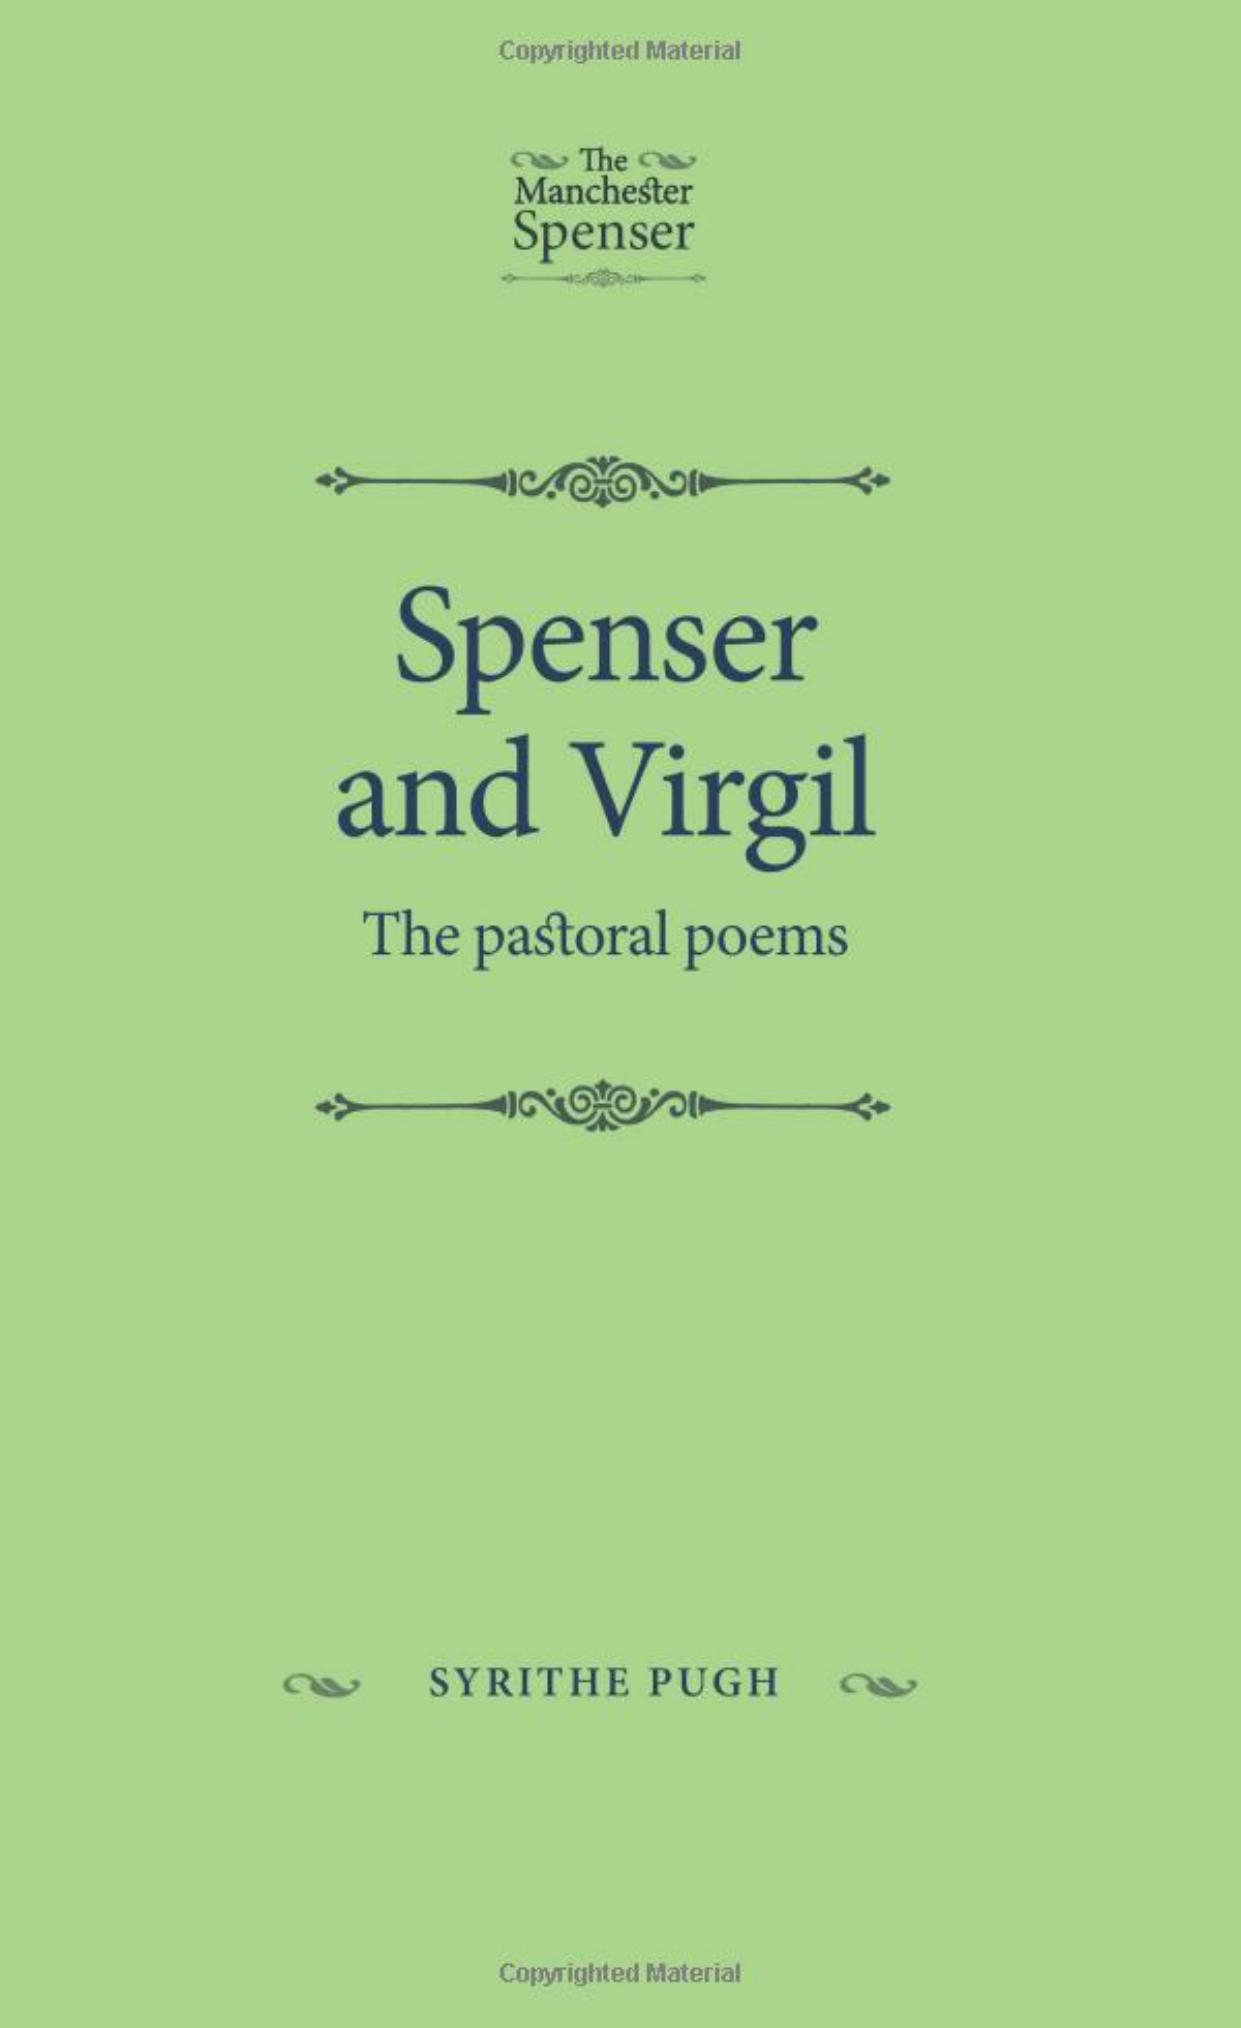 Spenser and Virgil: The Pastoral Poems by Syrithe Pugh